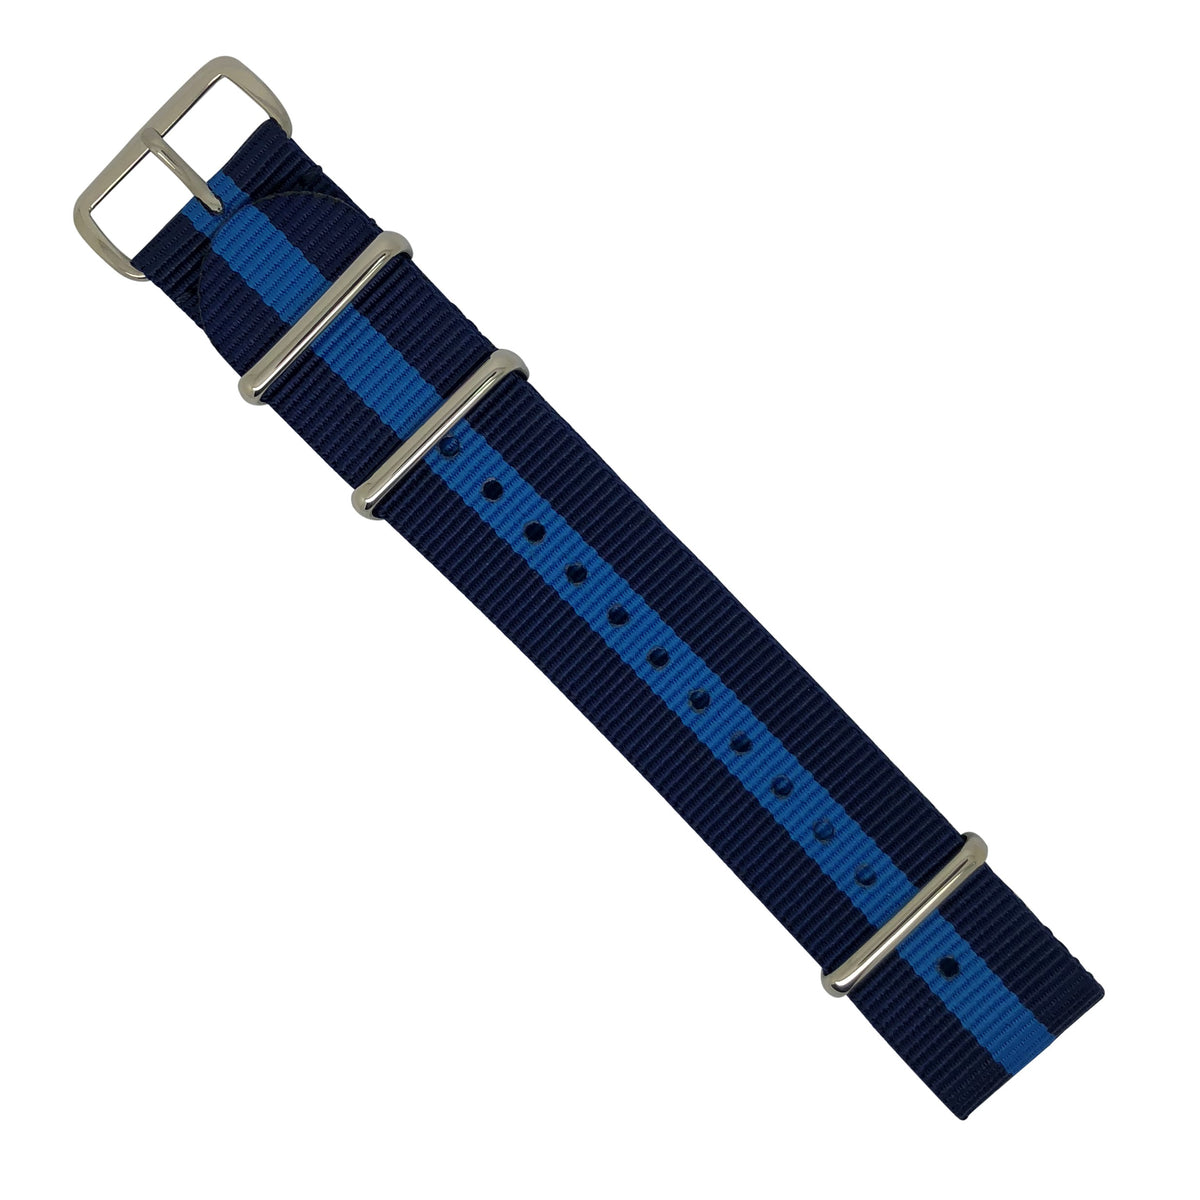 Premium Nato Strap in Navy Blue with Polished Silver Buckle (22mm) - Nomad watch Works